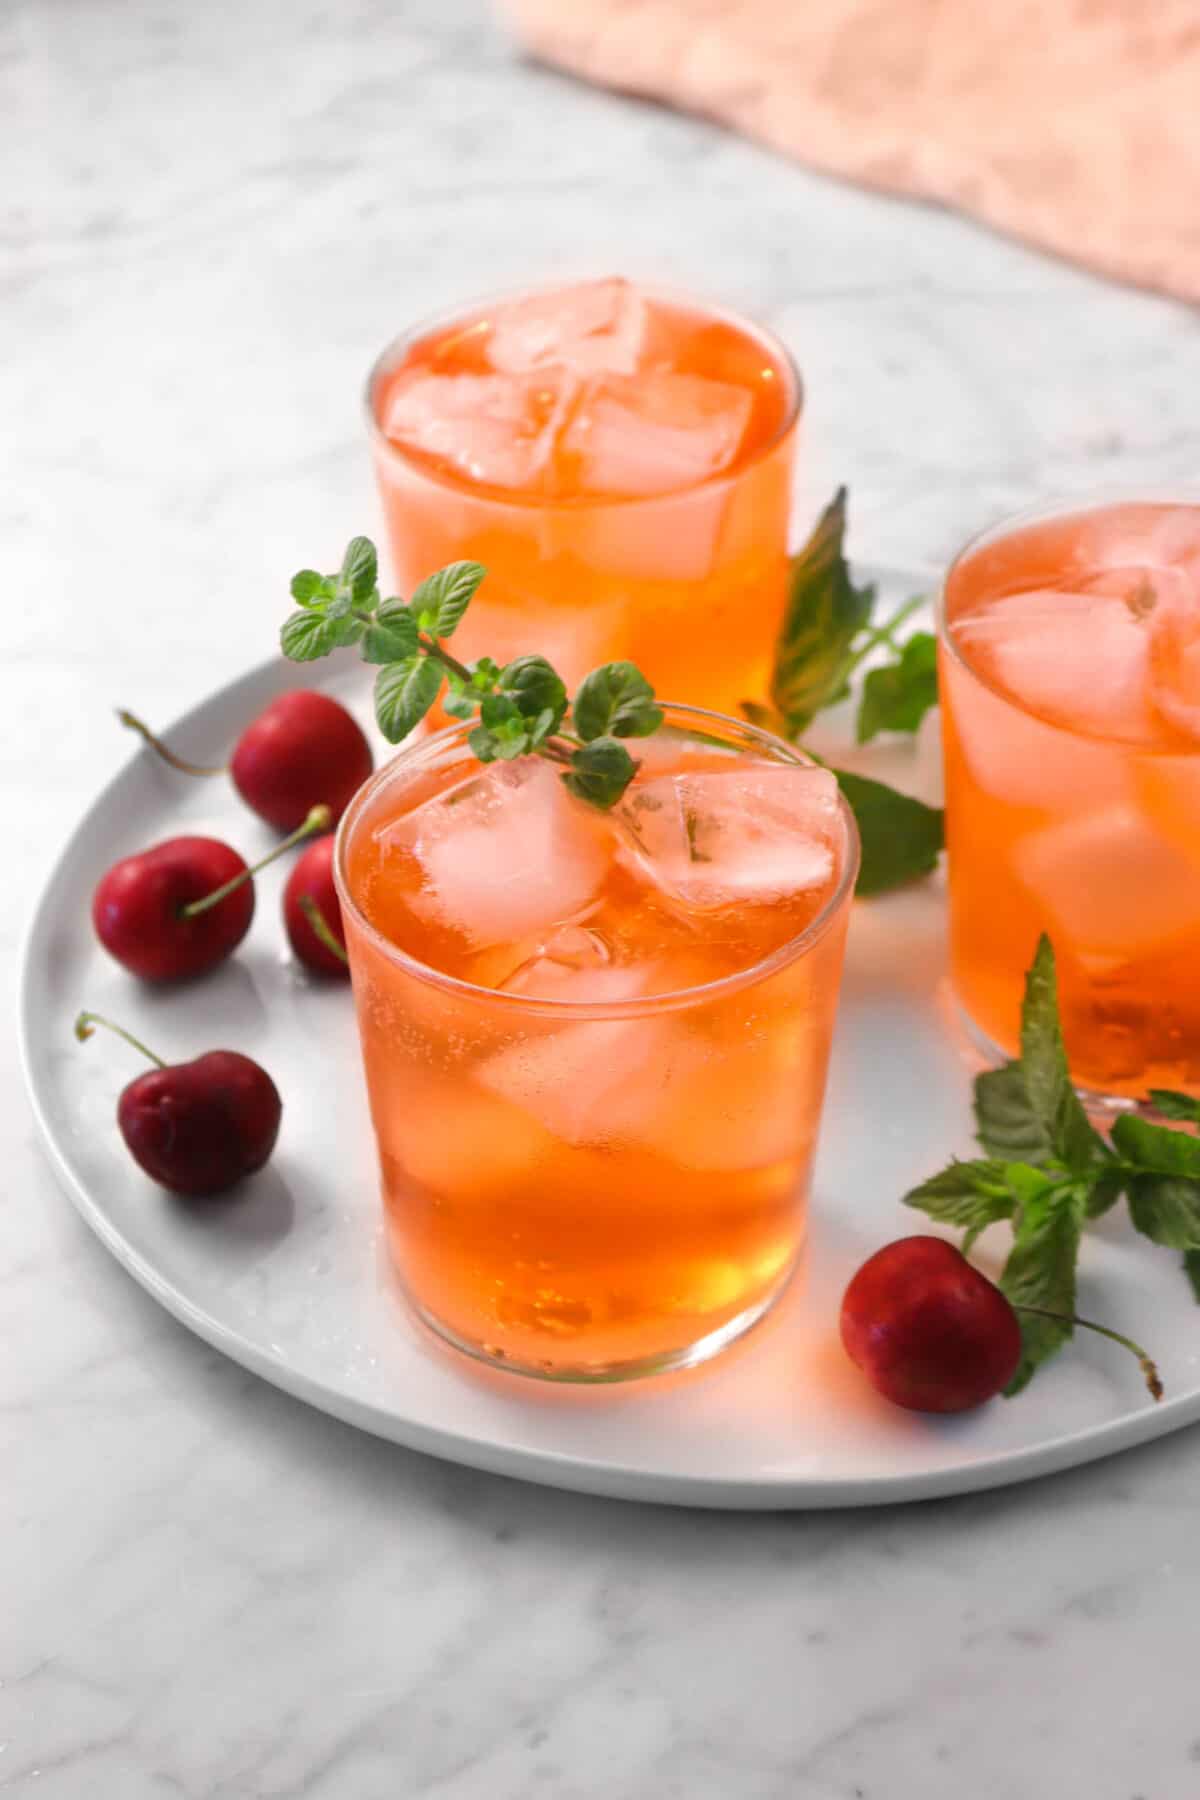 three glasses of Shirley temples on a white plate with cherries, mint, and a pink napkin